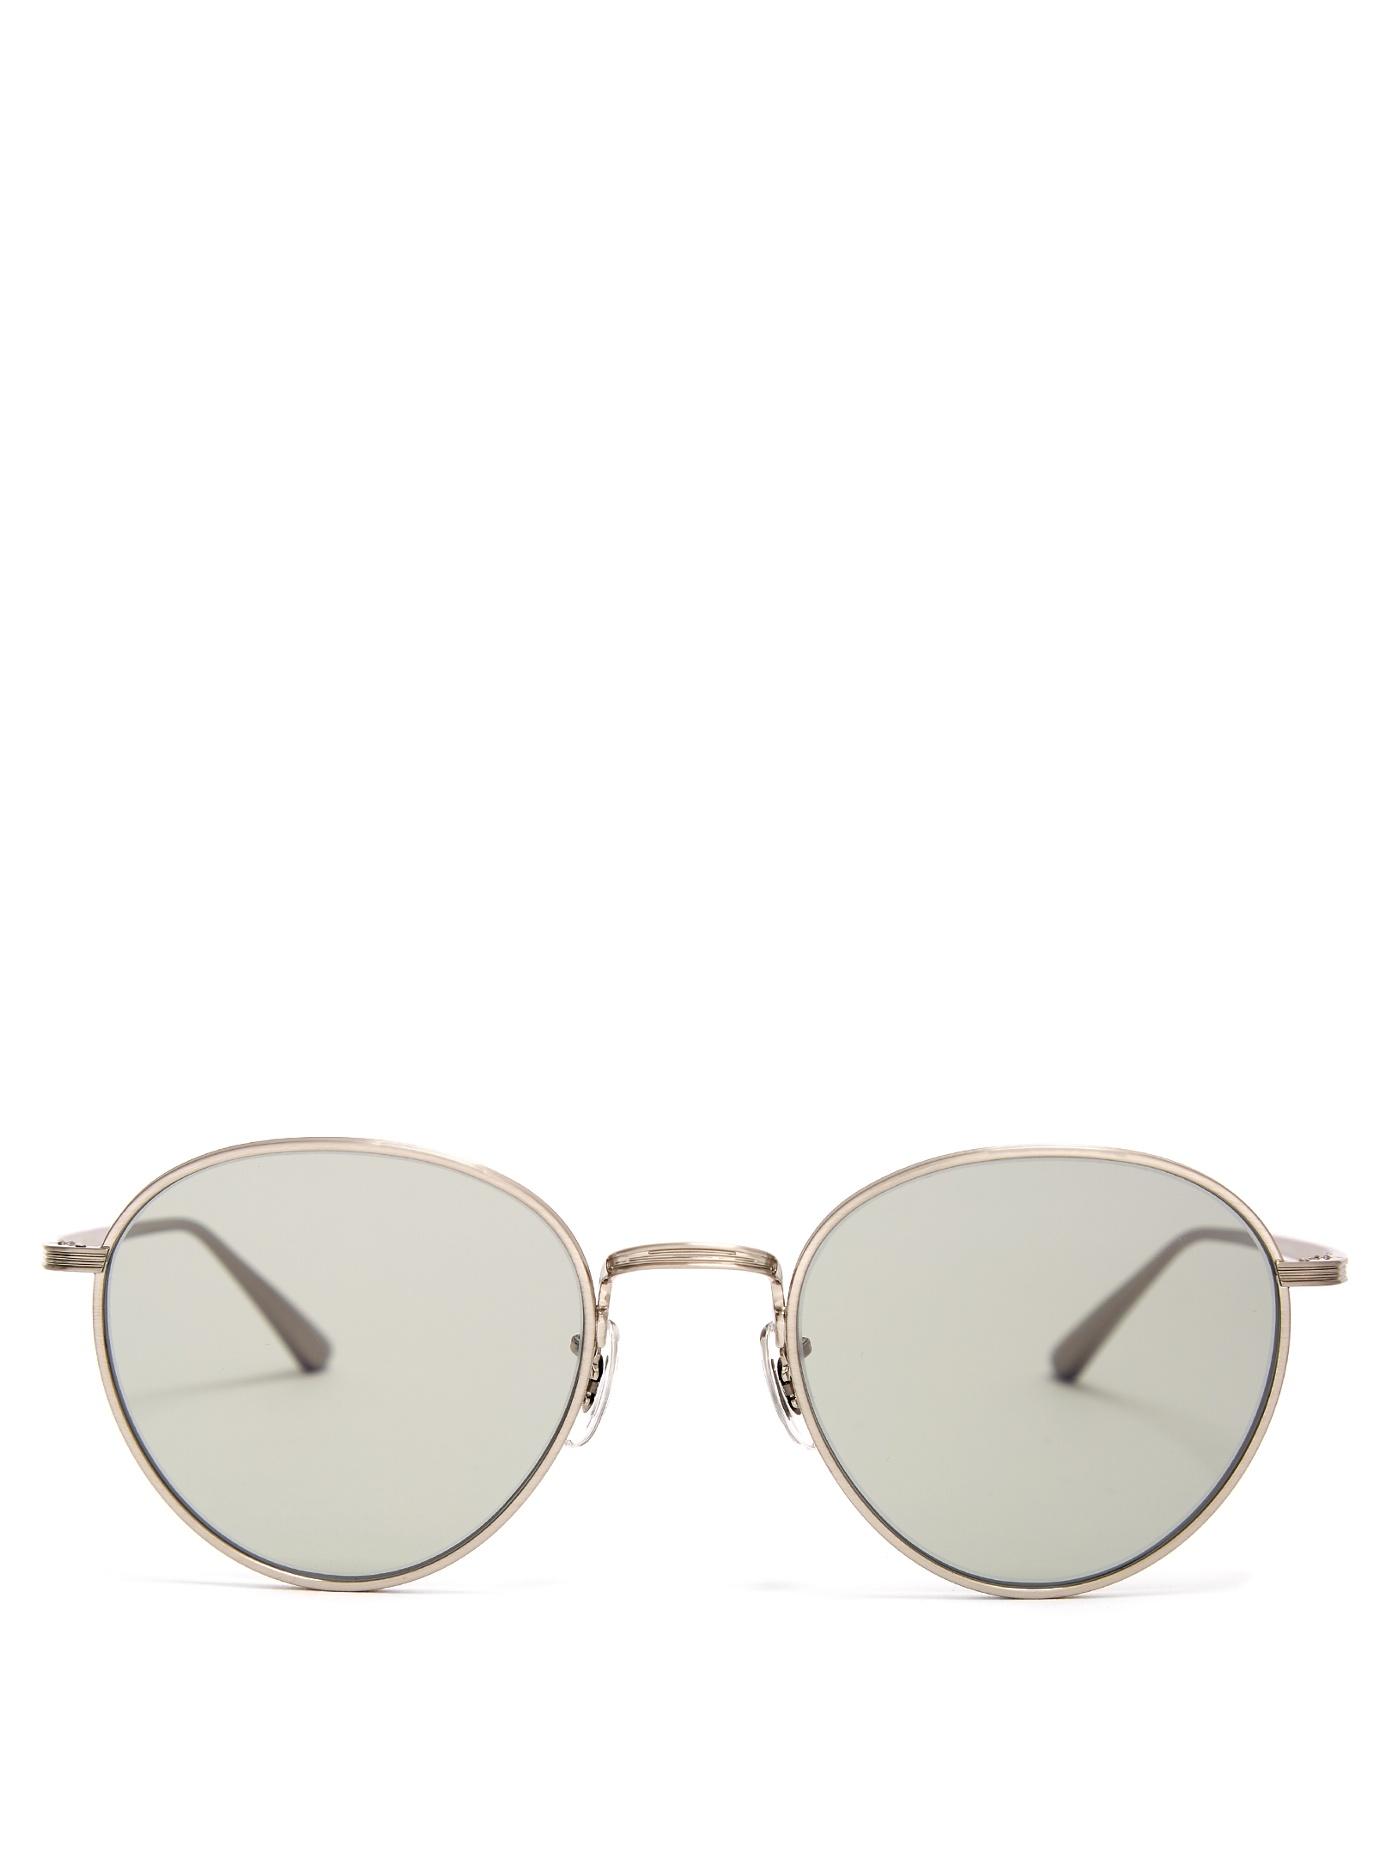 Shop The Row - X Oliver Peoples Brownstone 2 Sunglasses - Womens - Green